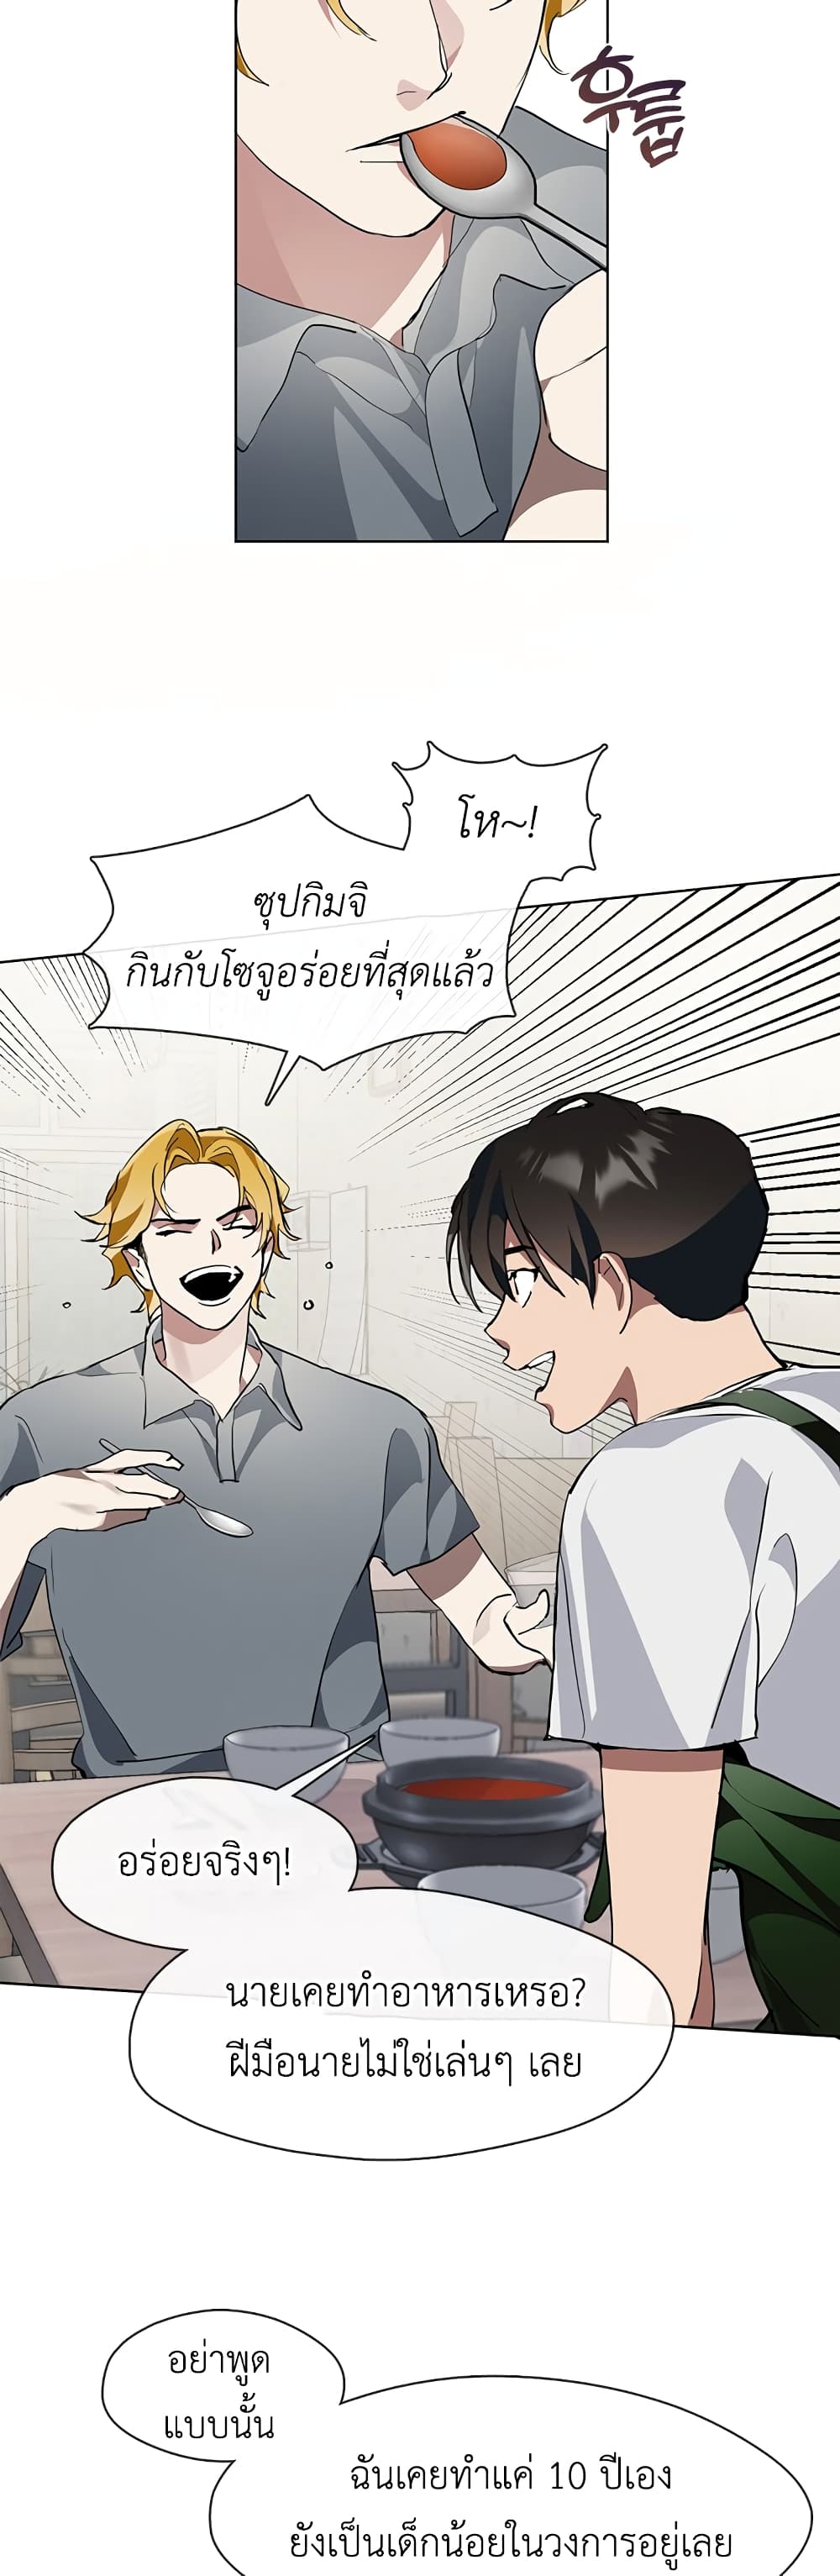 Restaurant in the After Life ตอนที่ 7 (11)